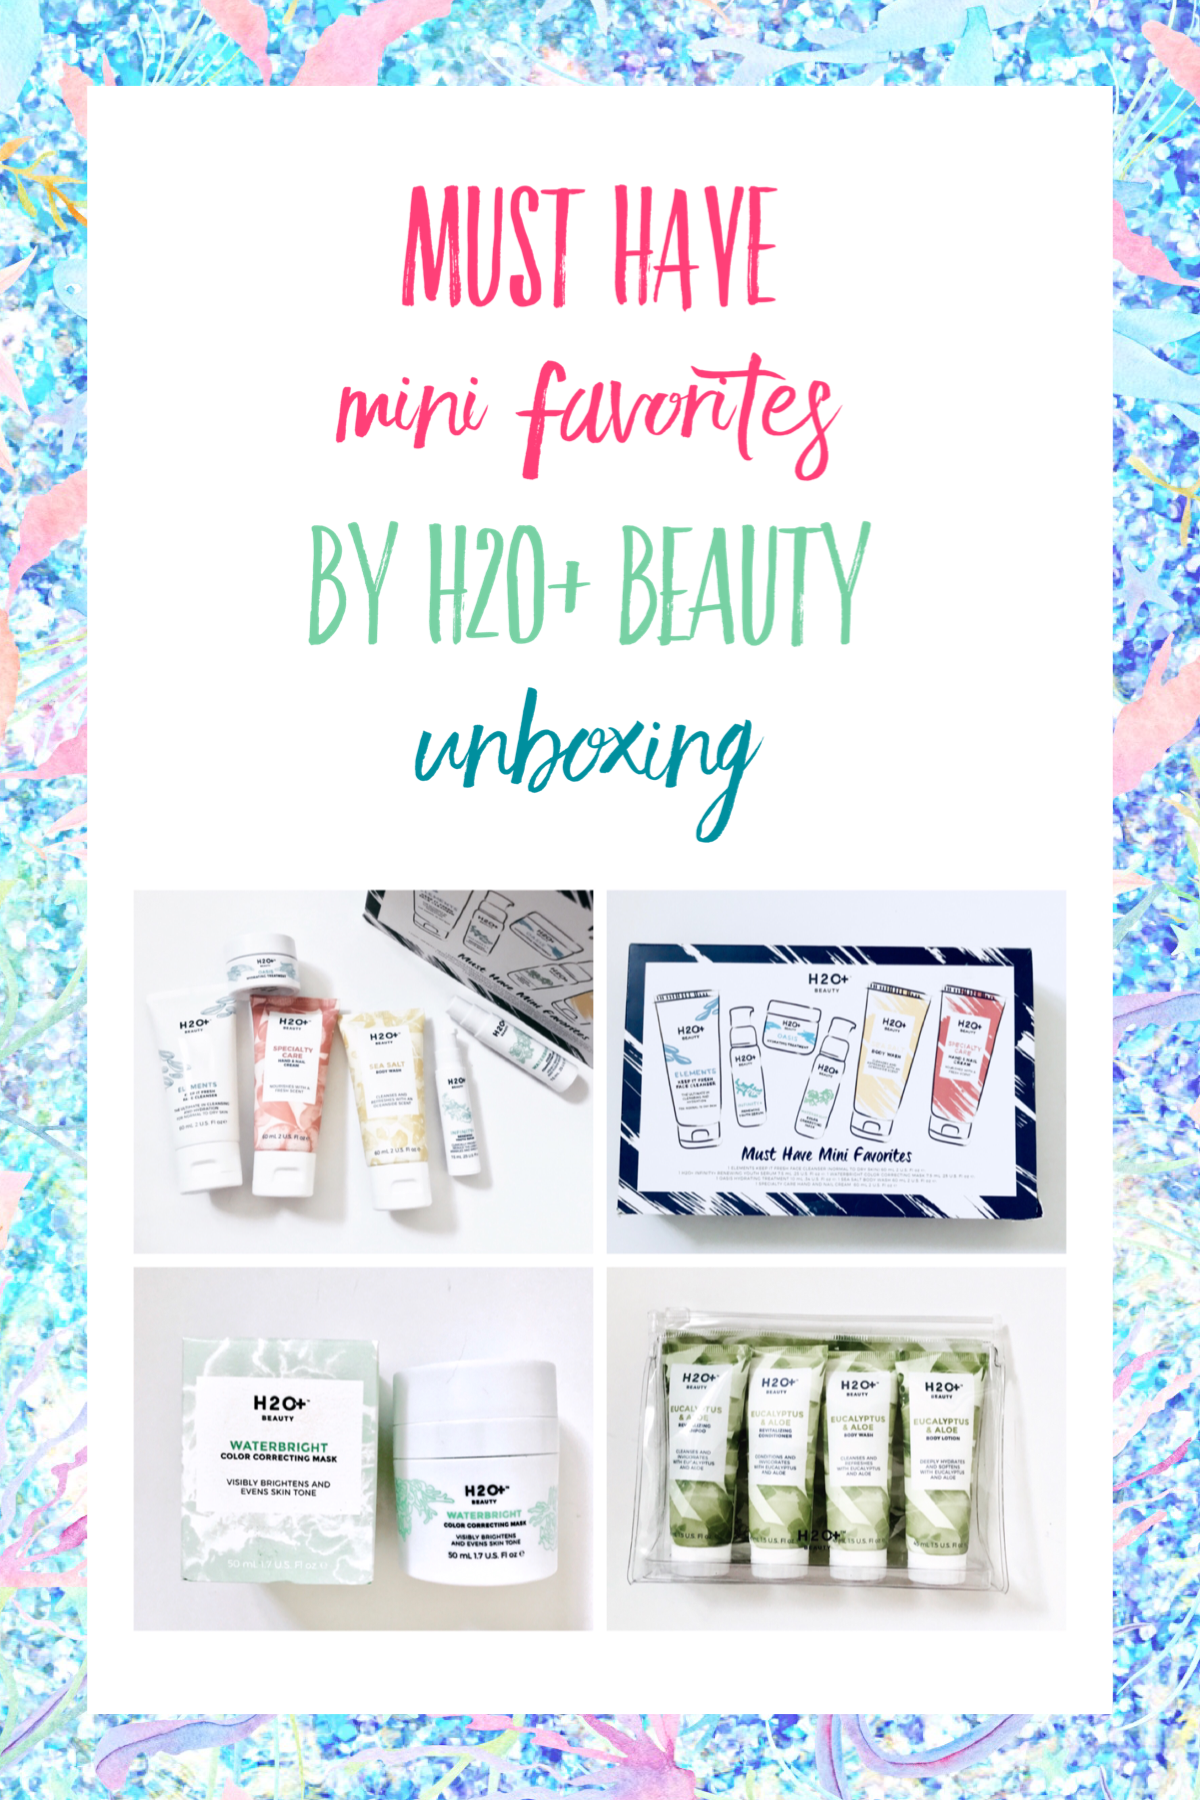 H2o+ Beauty Haul Favorites – An Unboxing And and Overview